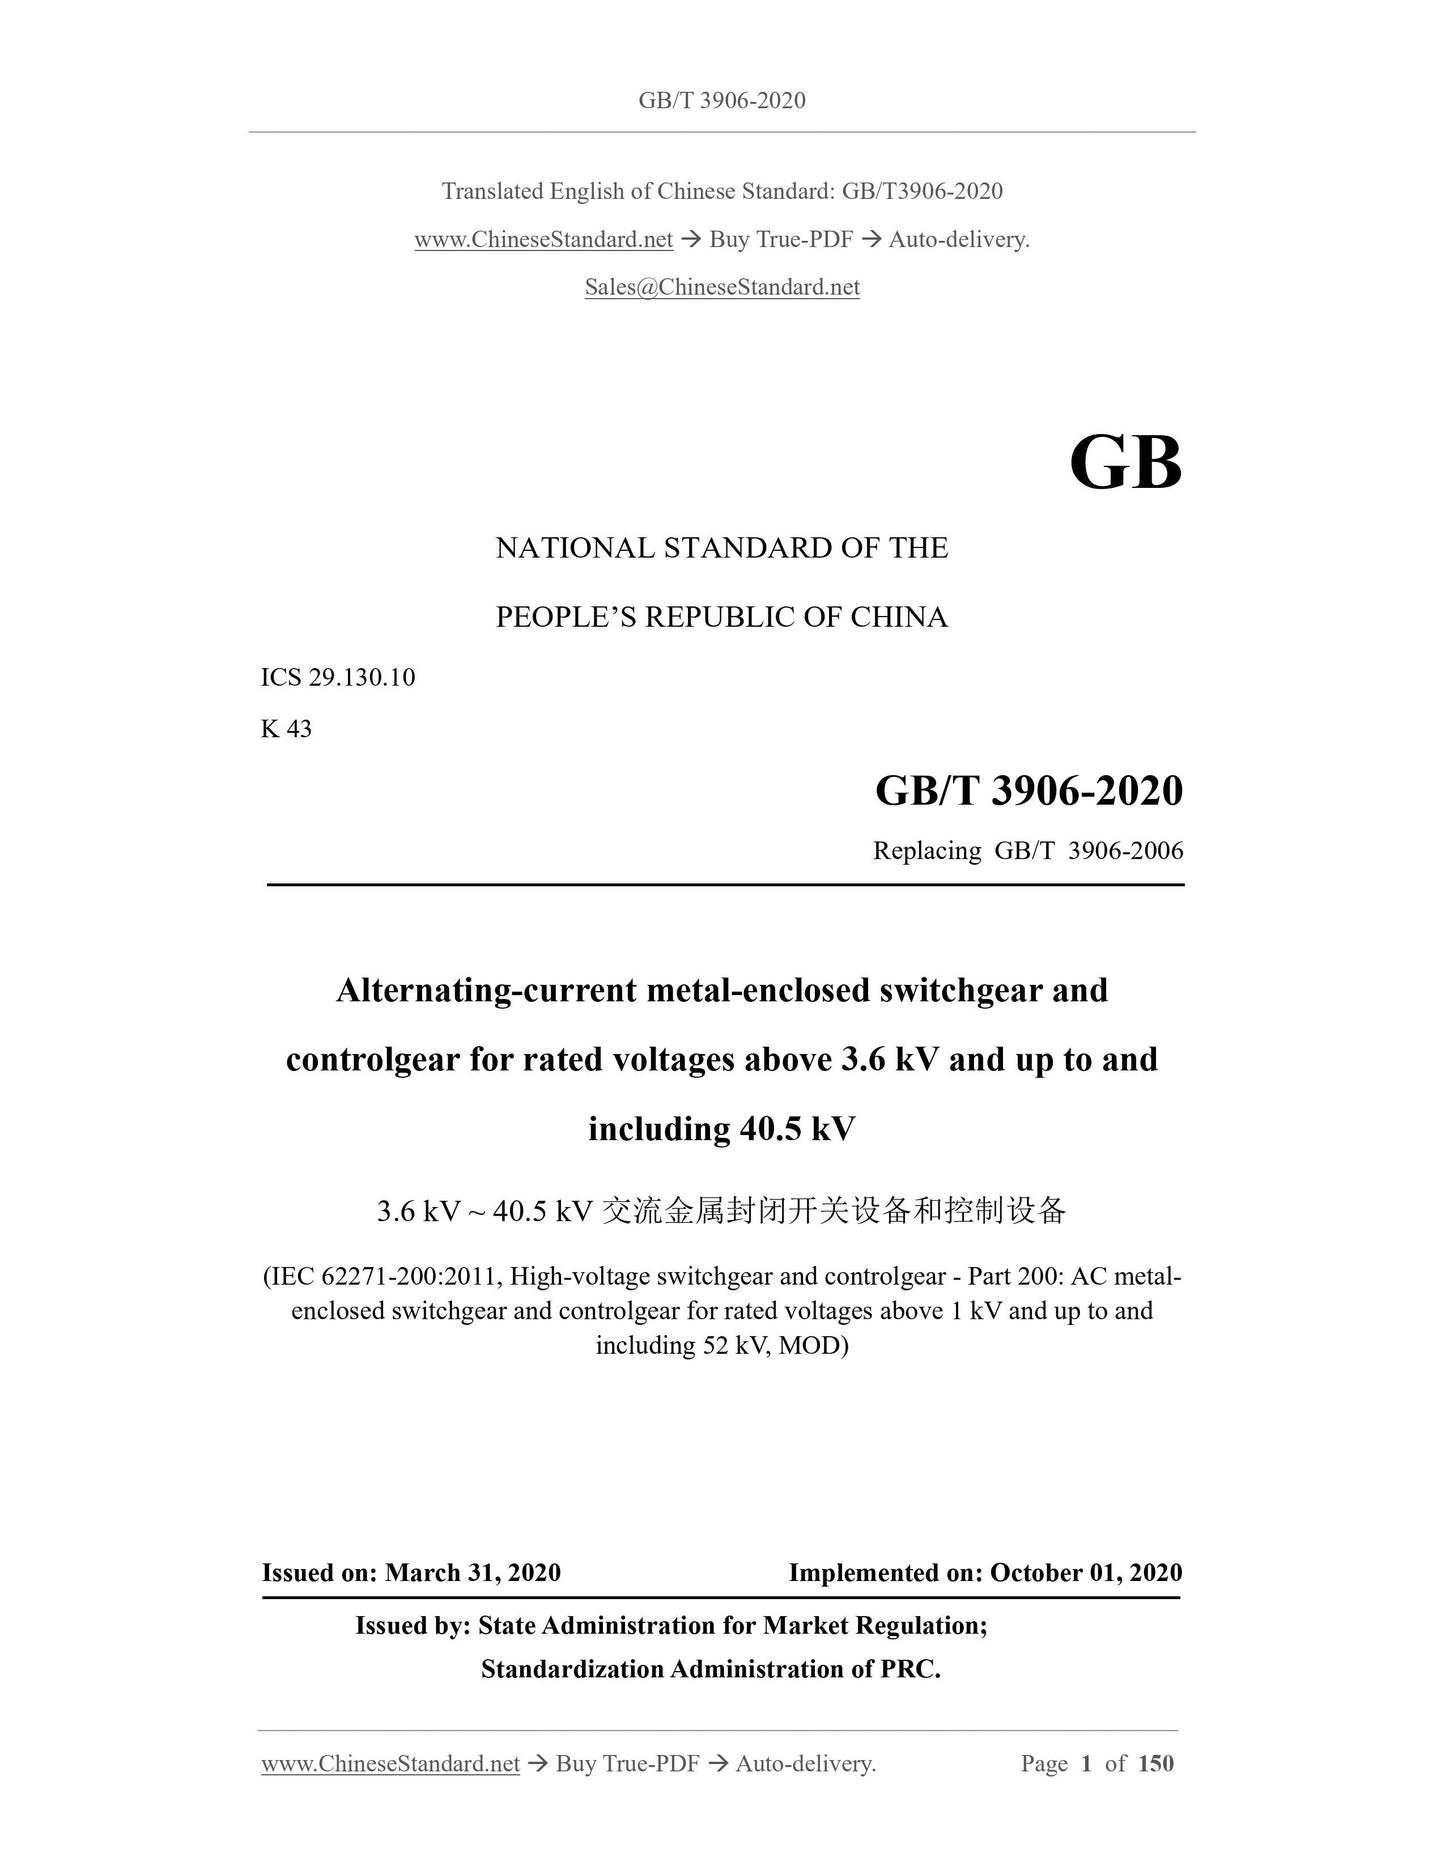 GB/T 3906-2020 Page 1